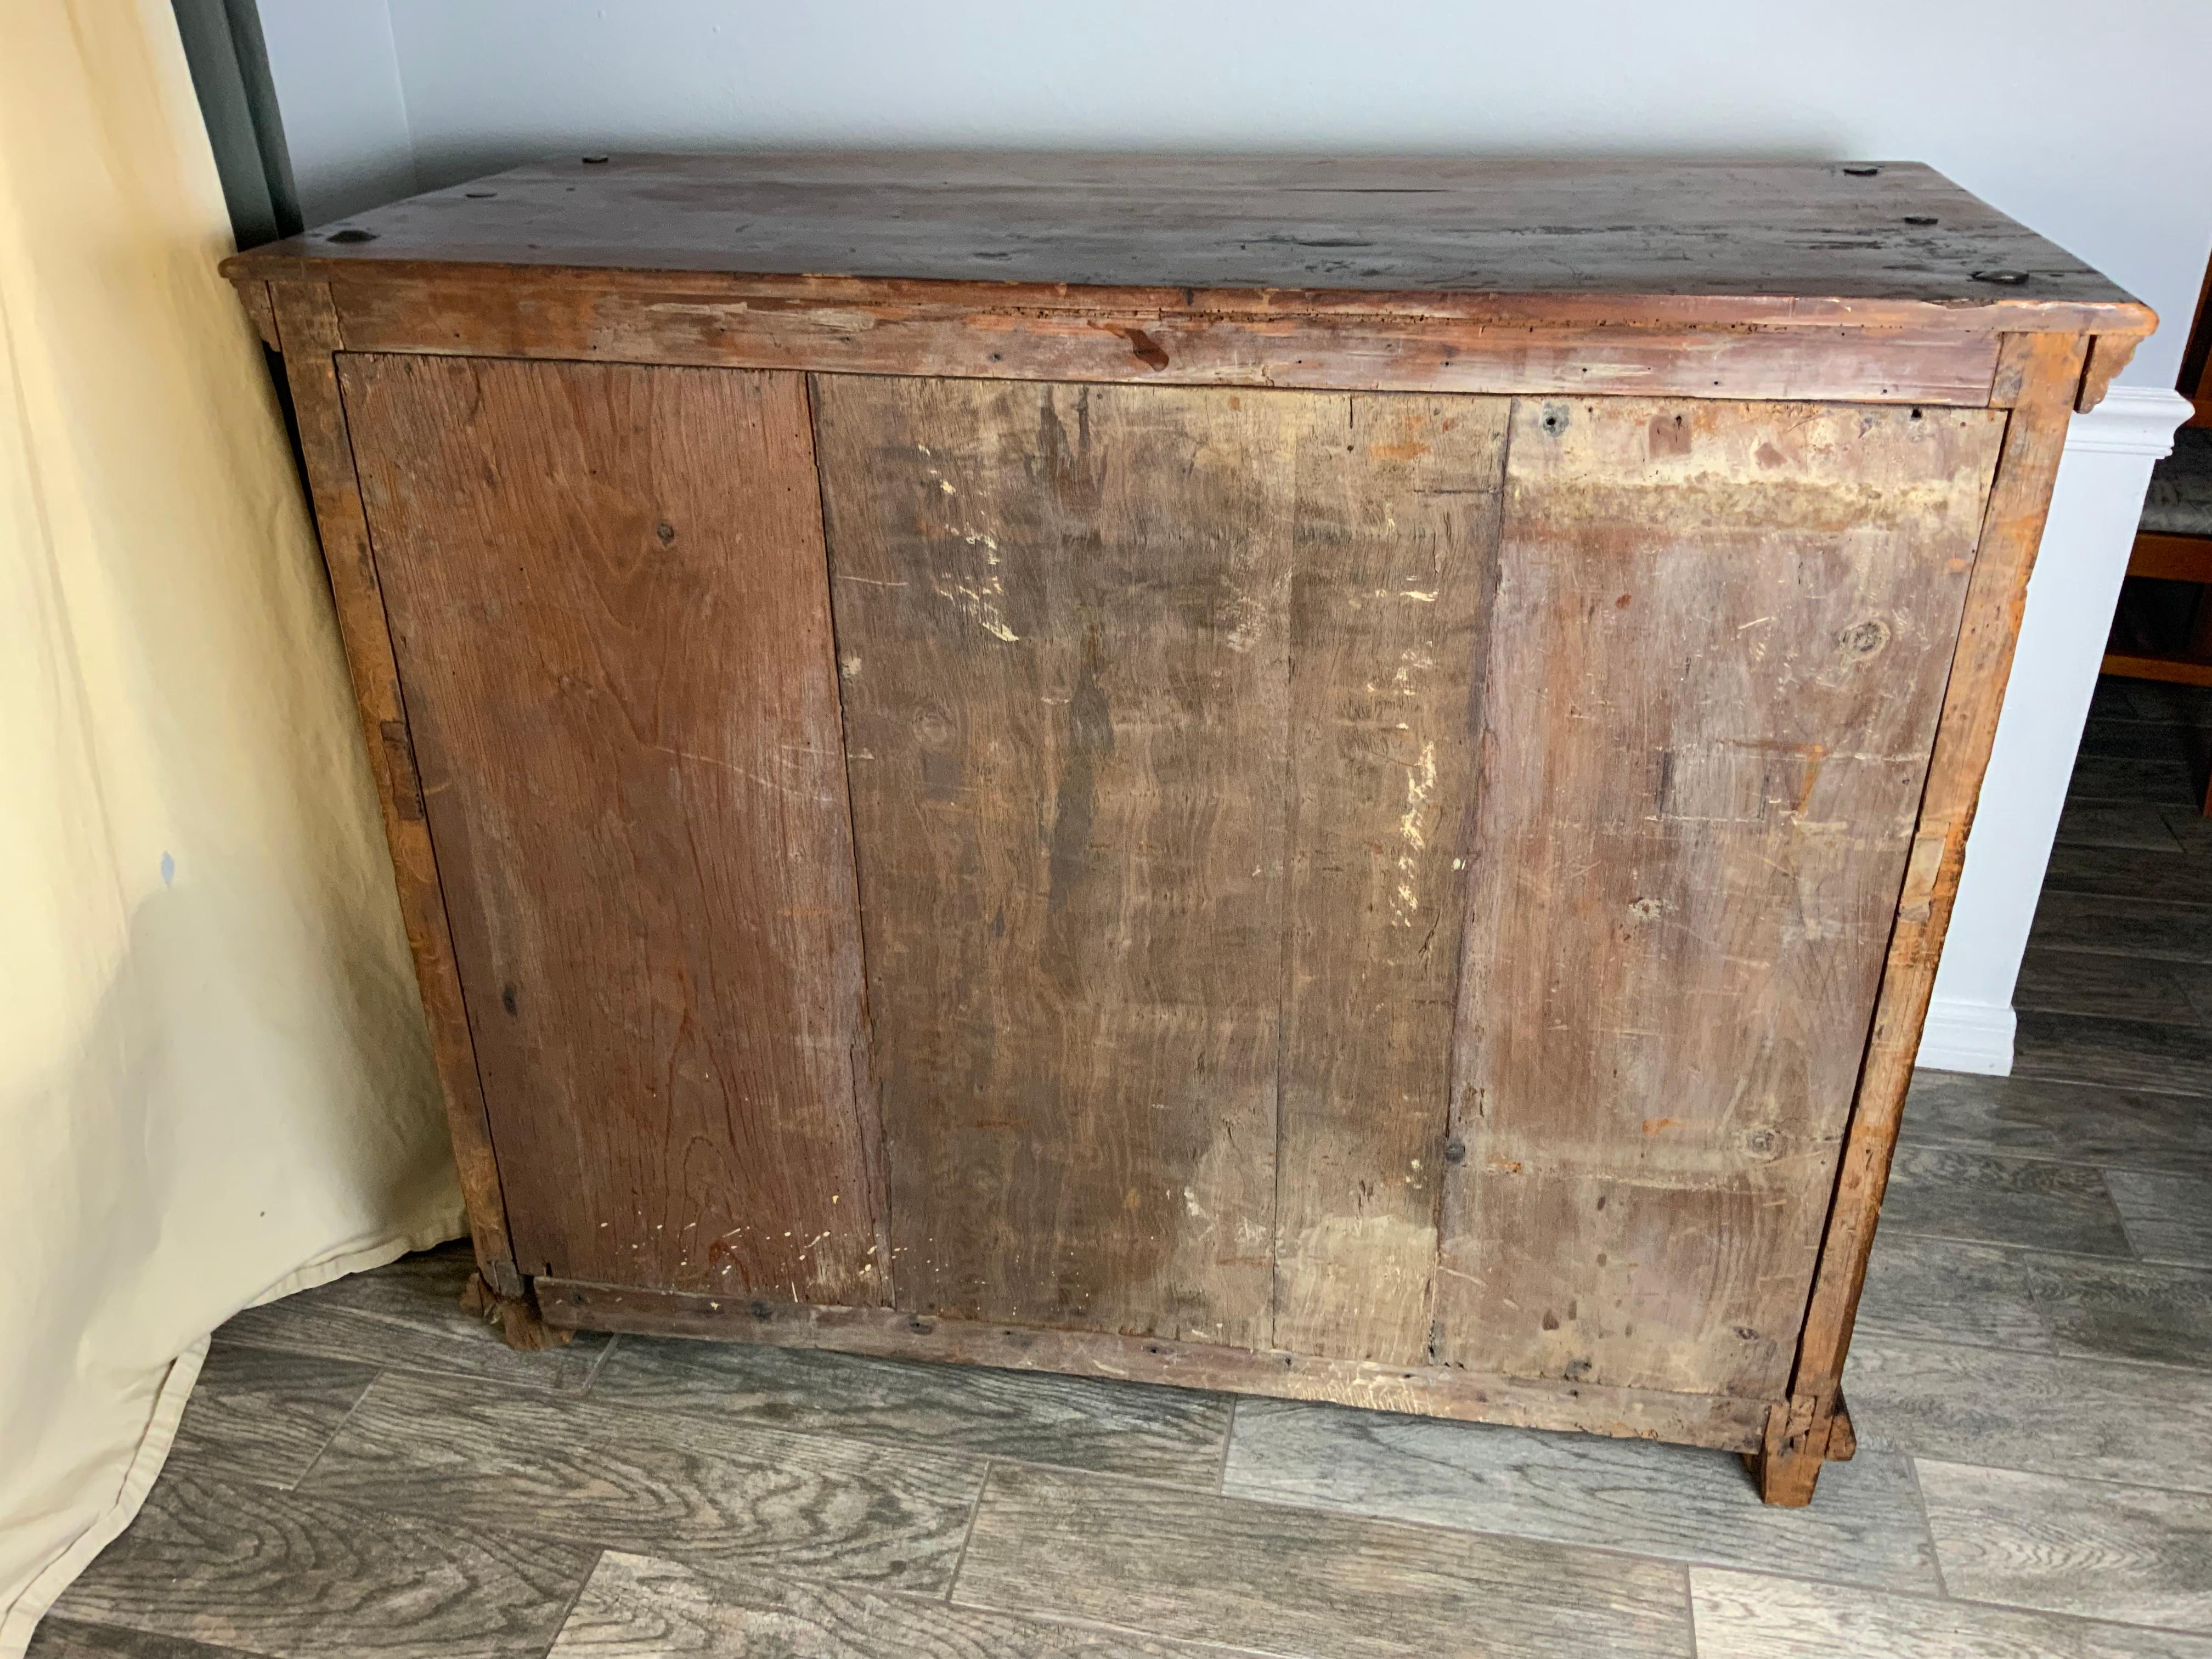 A very nice Spanish Colonial paneled cupboard or cabinet probably mid 18th century Spain constructed of Cedar and Pine.  All paneled construction with clavos trim nails on the top. One original shelf in the interior.  Original hardware and a working